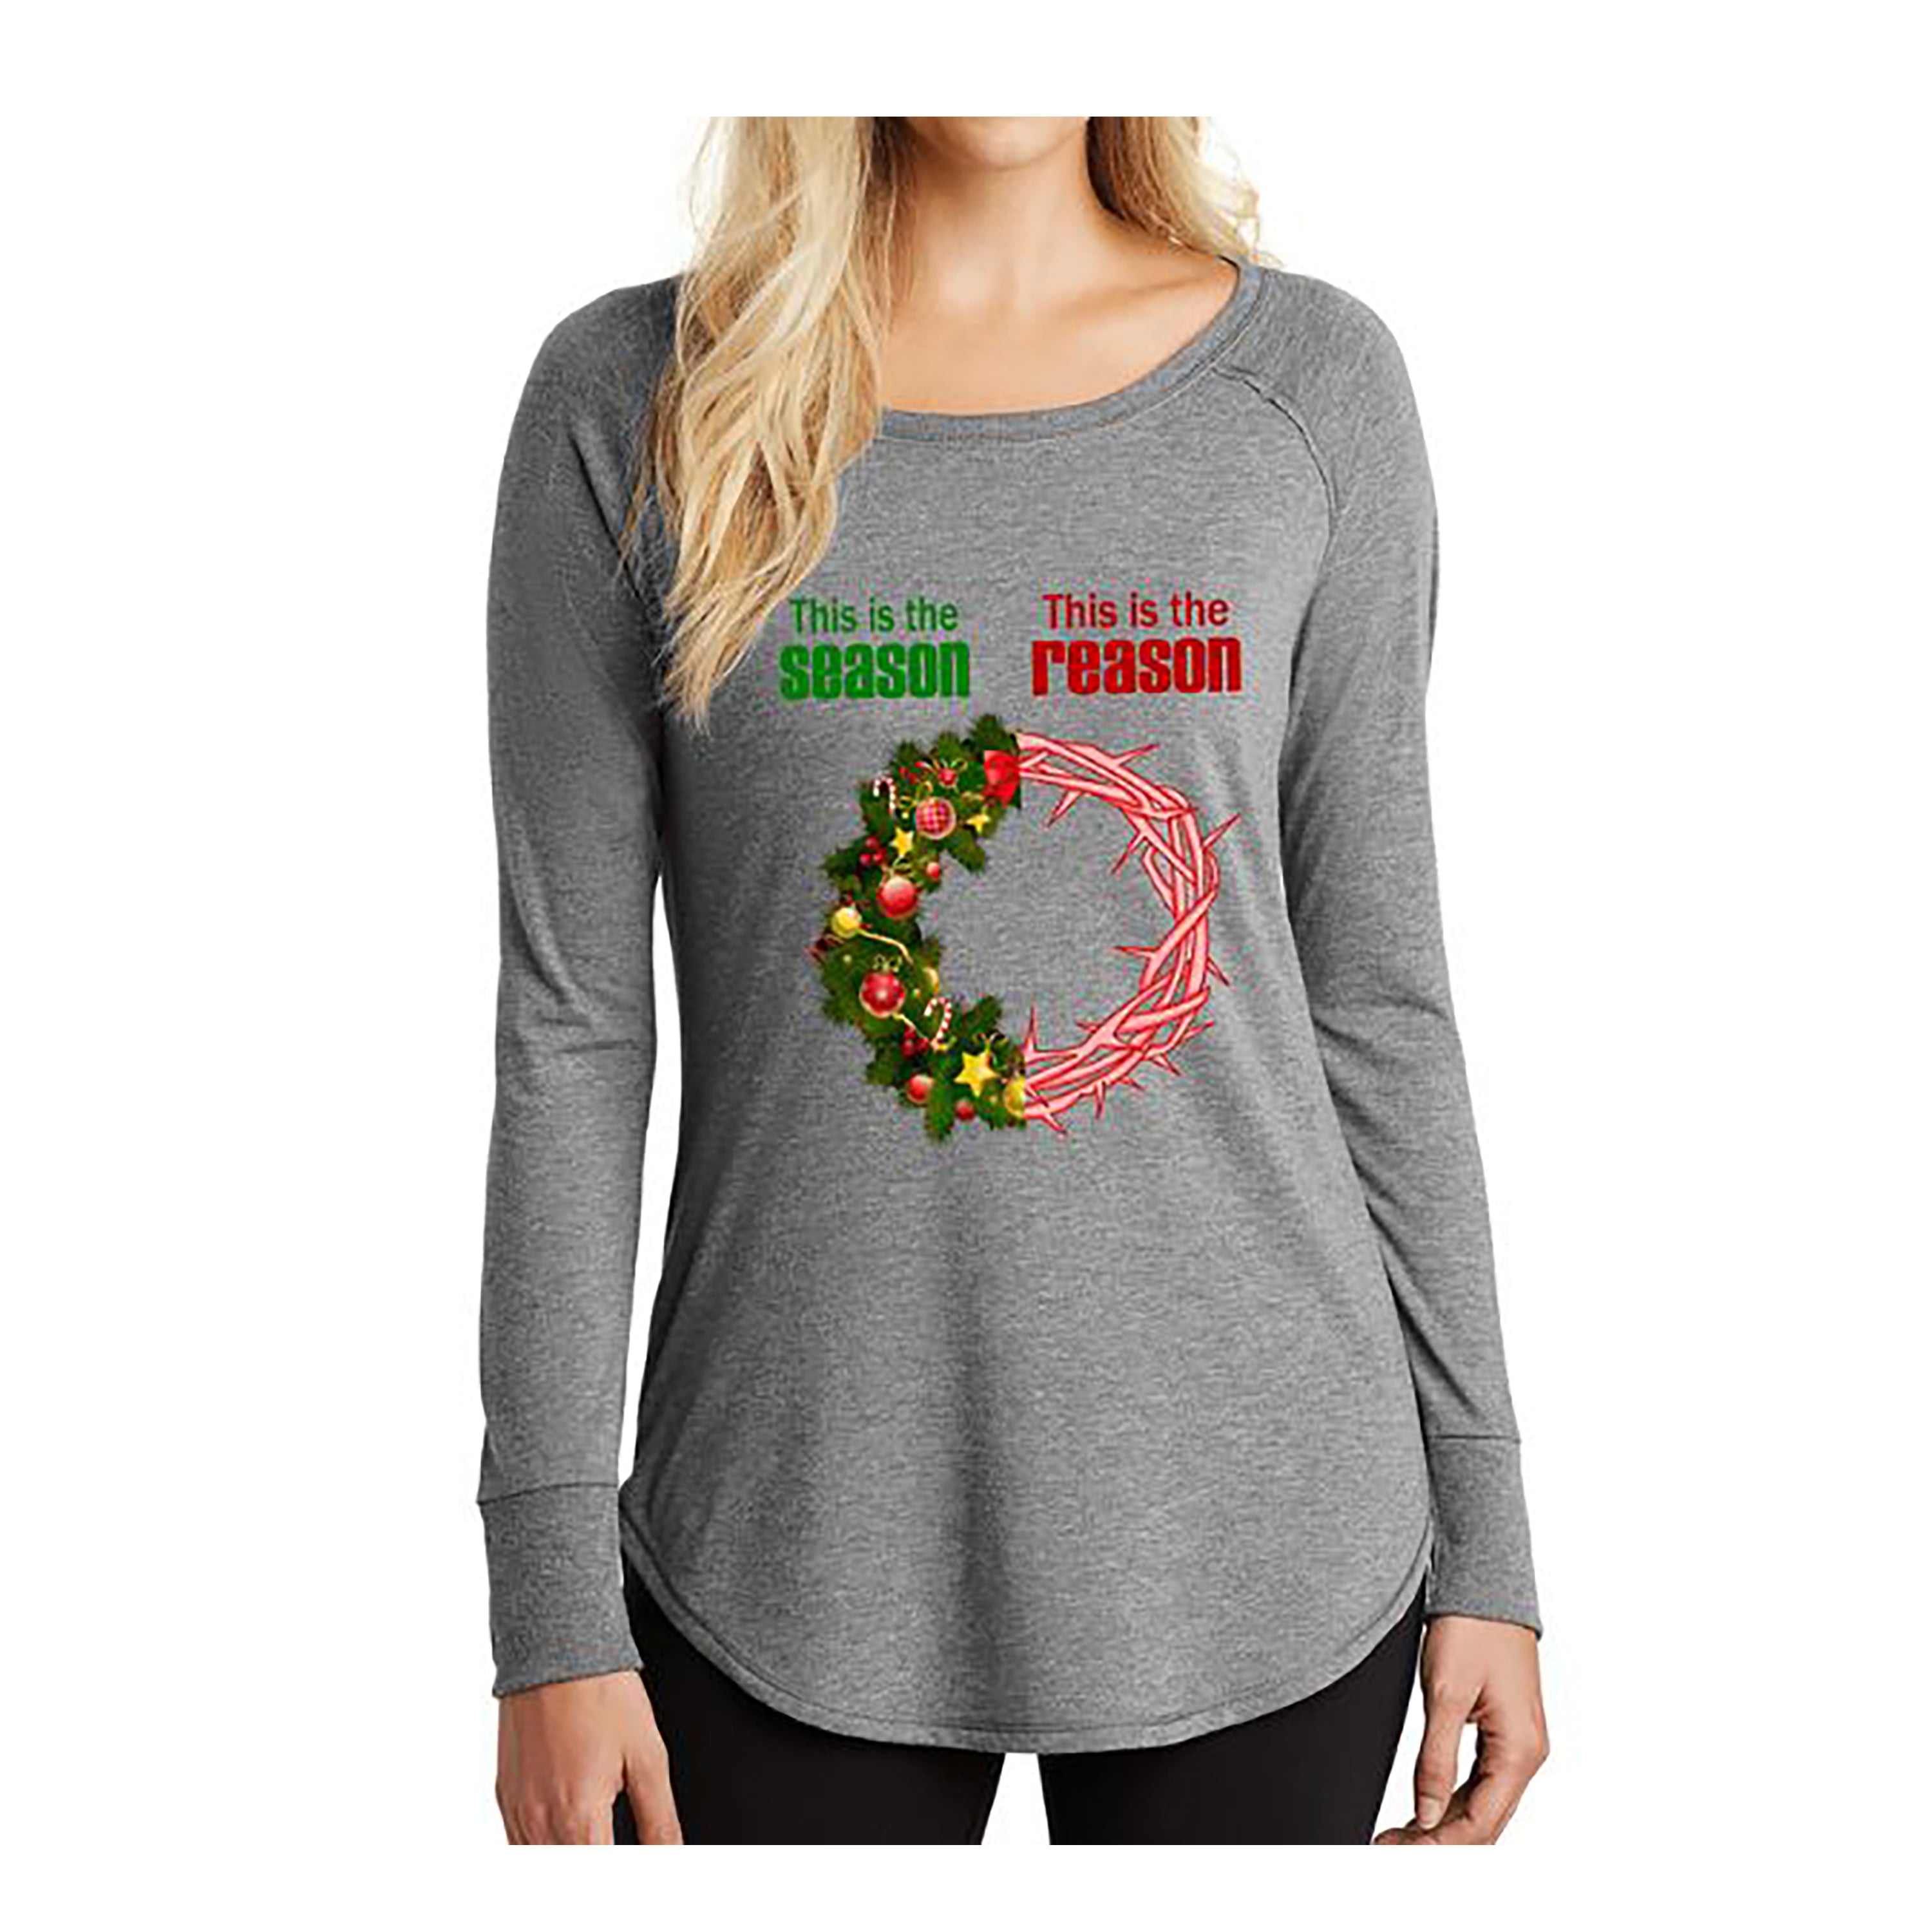 "THIS IS THE REASON THIS IS THE SEASON"- Stylish Long-Sleeve Tee